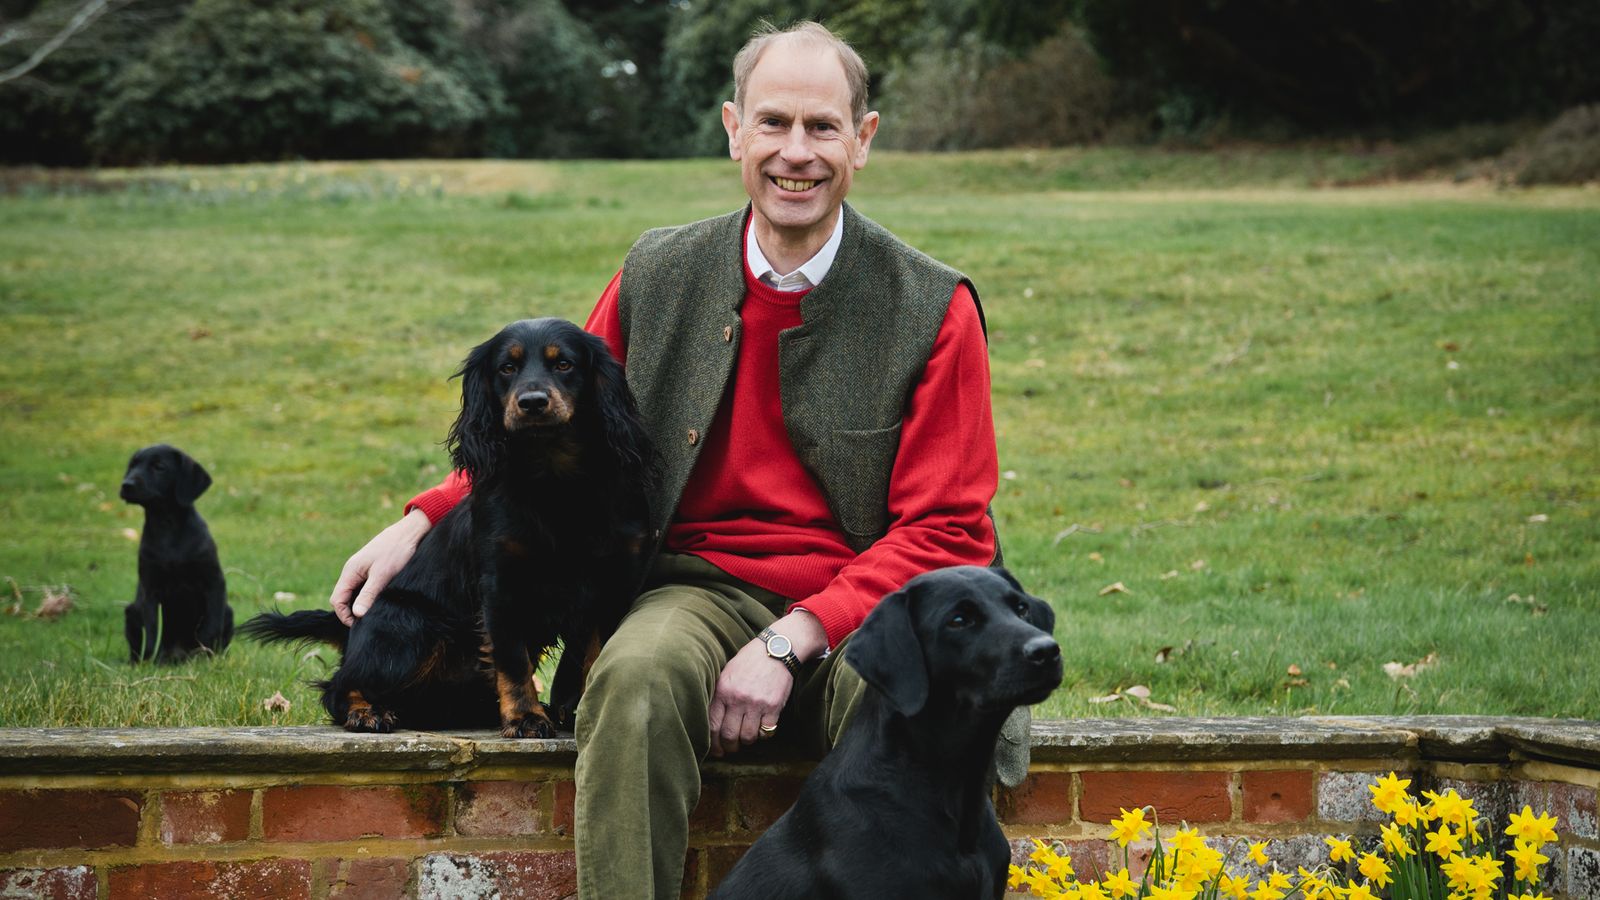 New photos released to mark Prince Edward's 60th birthday